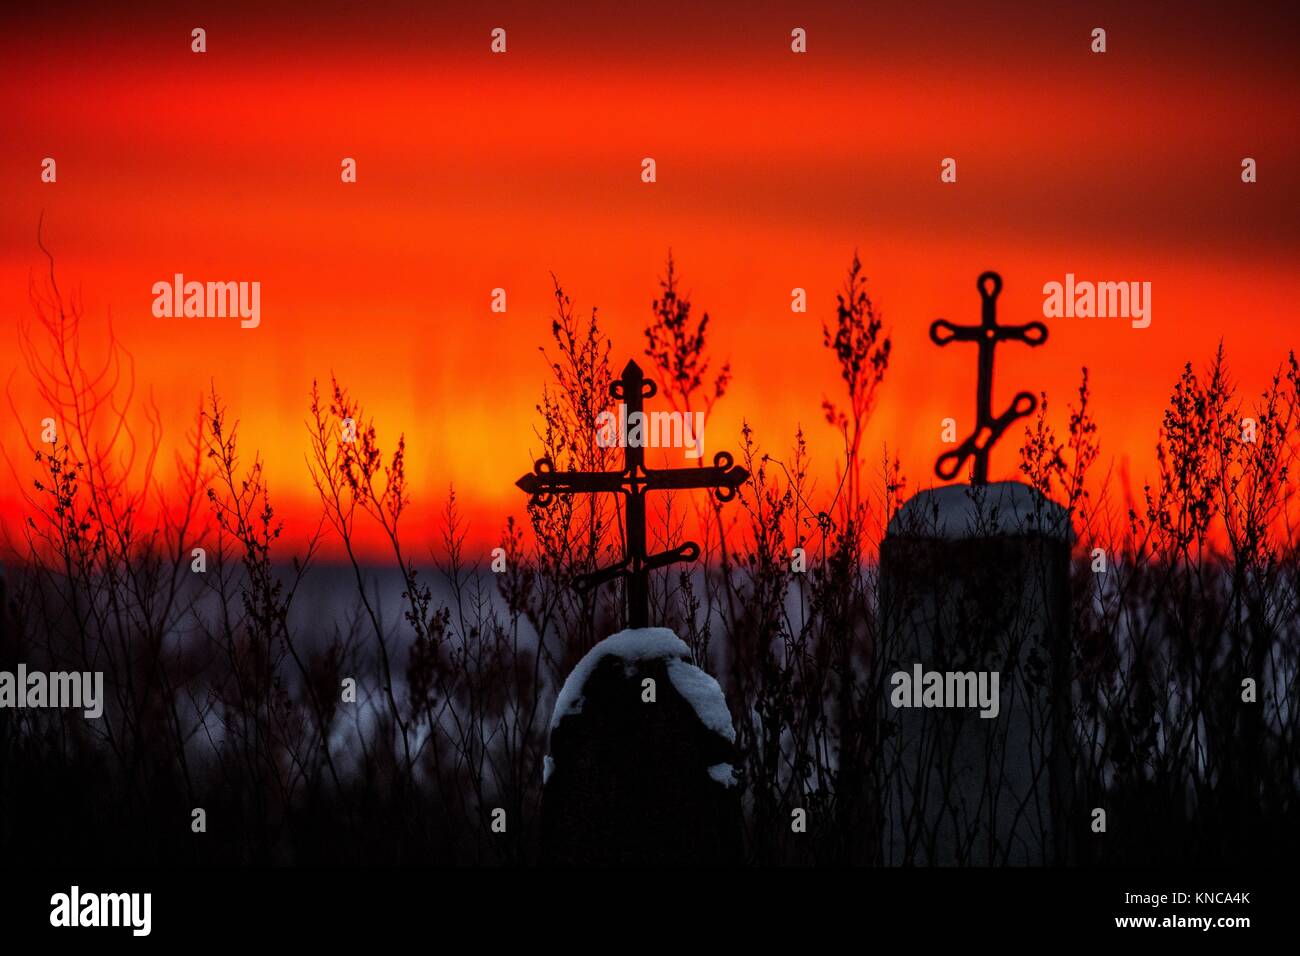 Christian cross silhouette with the bloody sunset as background. Stock Photo